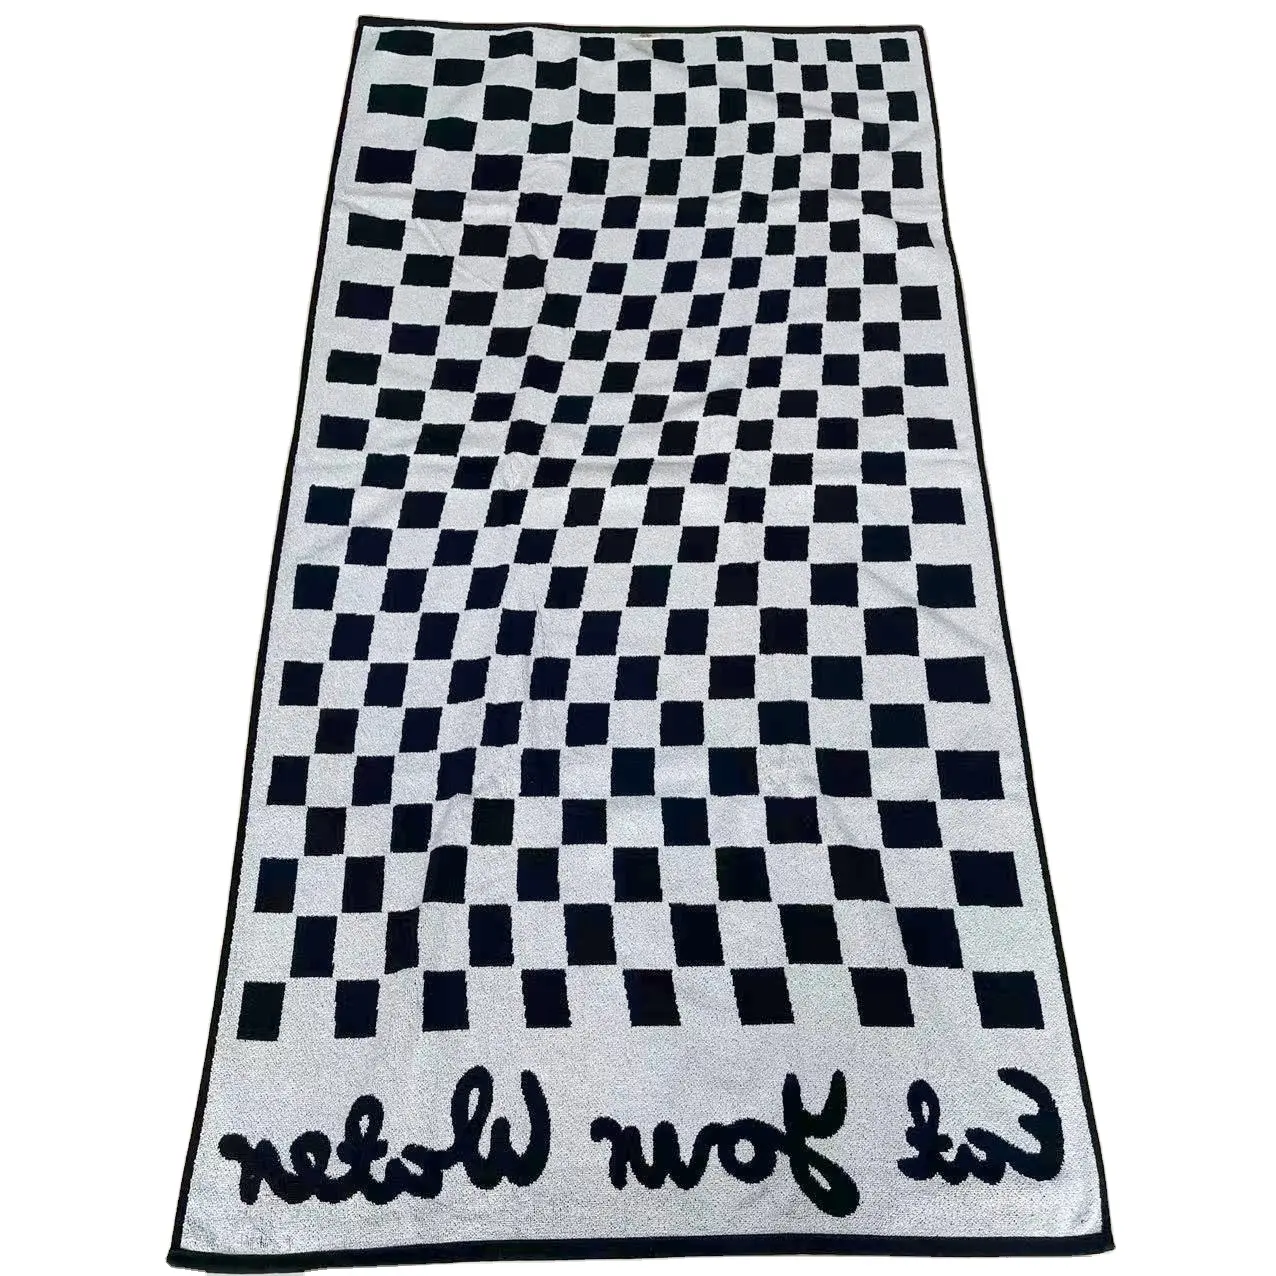 100% organic jacquard beach towel water absorbent towels luxury high gsm with Checkerboard Towel 100% Cotton Bath